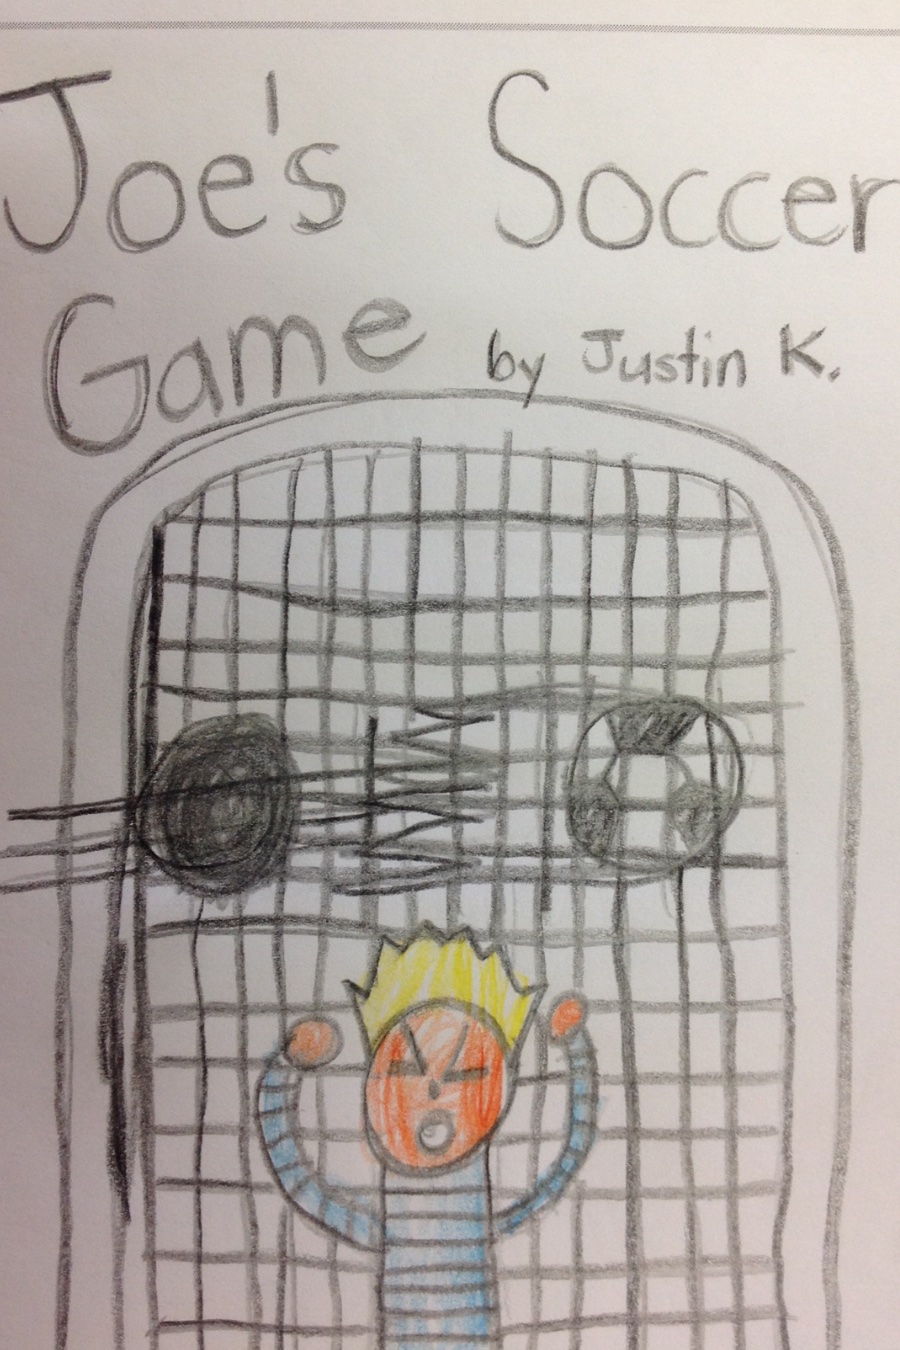 Joes Soccer Game by Justin K